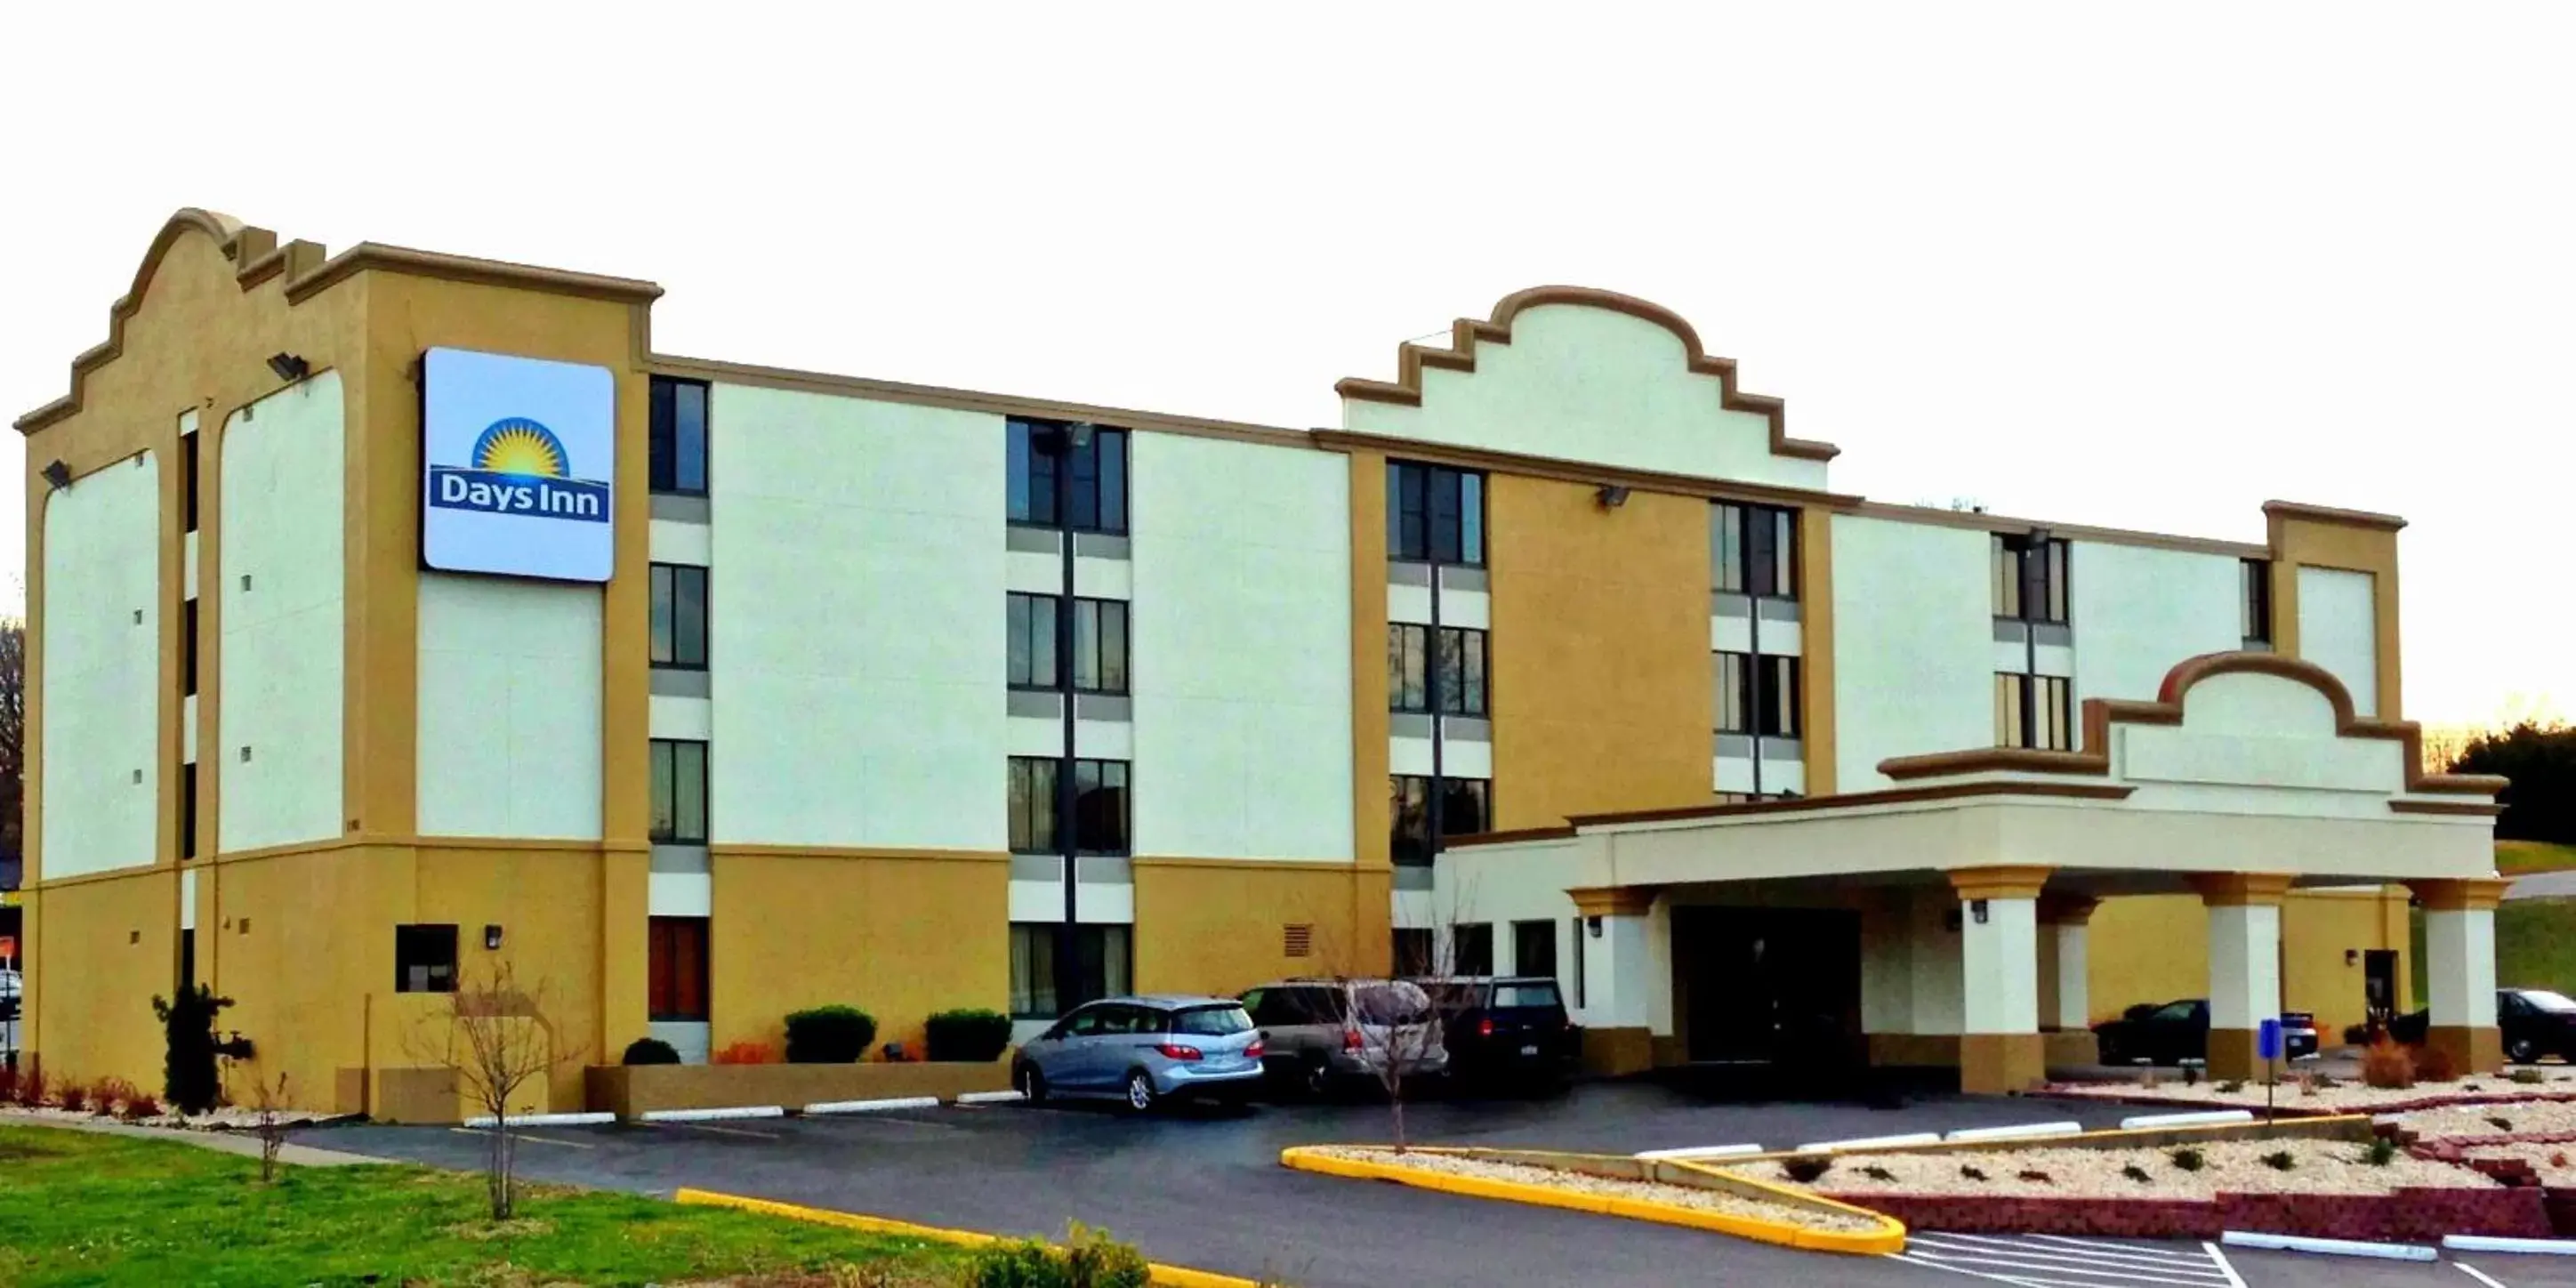 Facade/entrance, Property Building in Days Inn by Wyndham Hagerstown